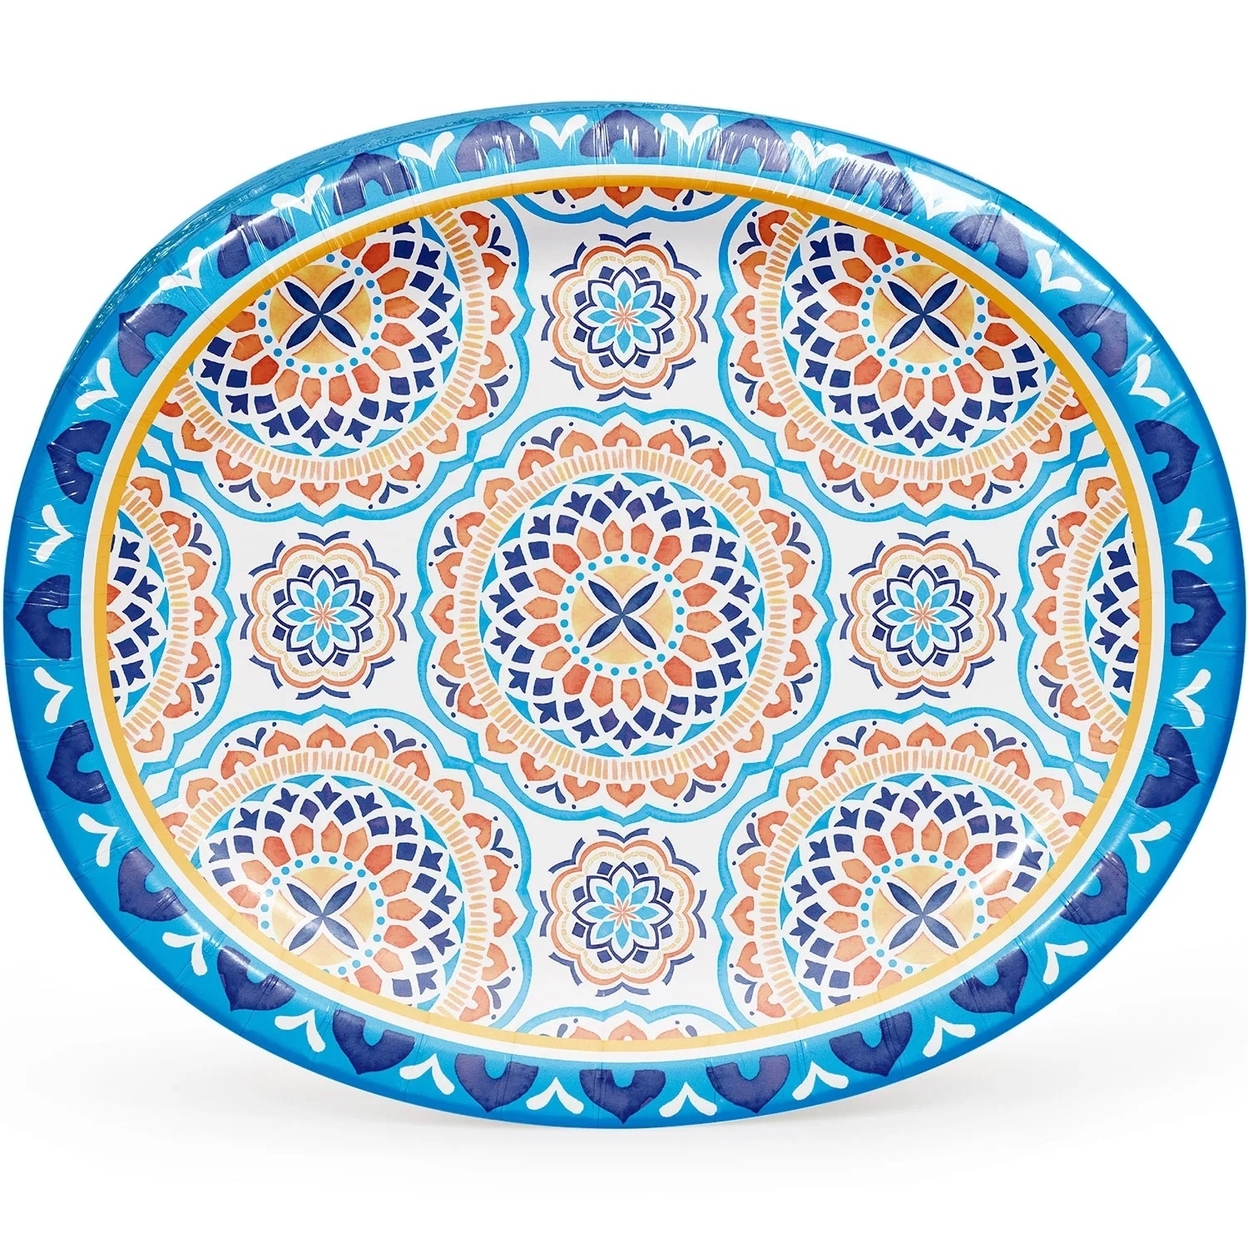 Member's Mark Medallion Mix Oval Paper Plates, 10 X 12 (50 Count)